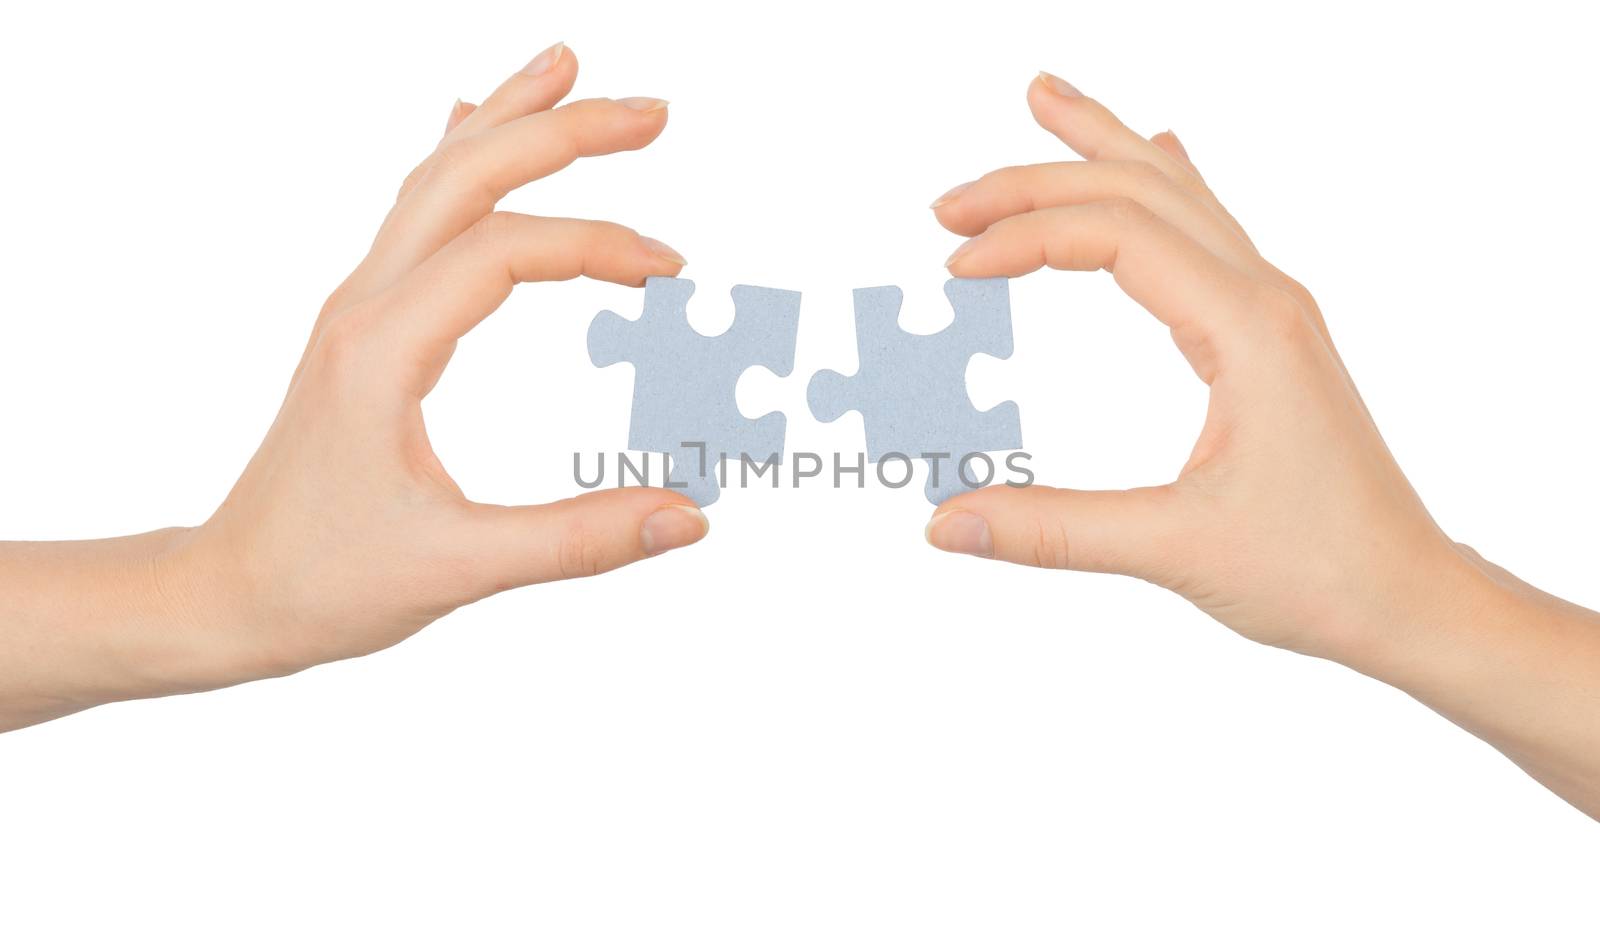 Hands holding puzzle pieces on isolated white background